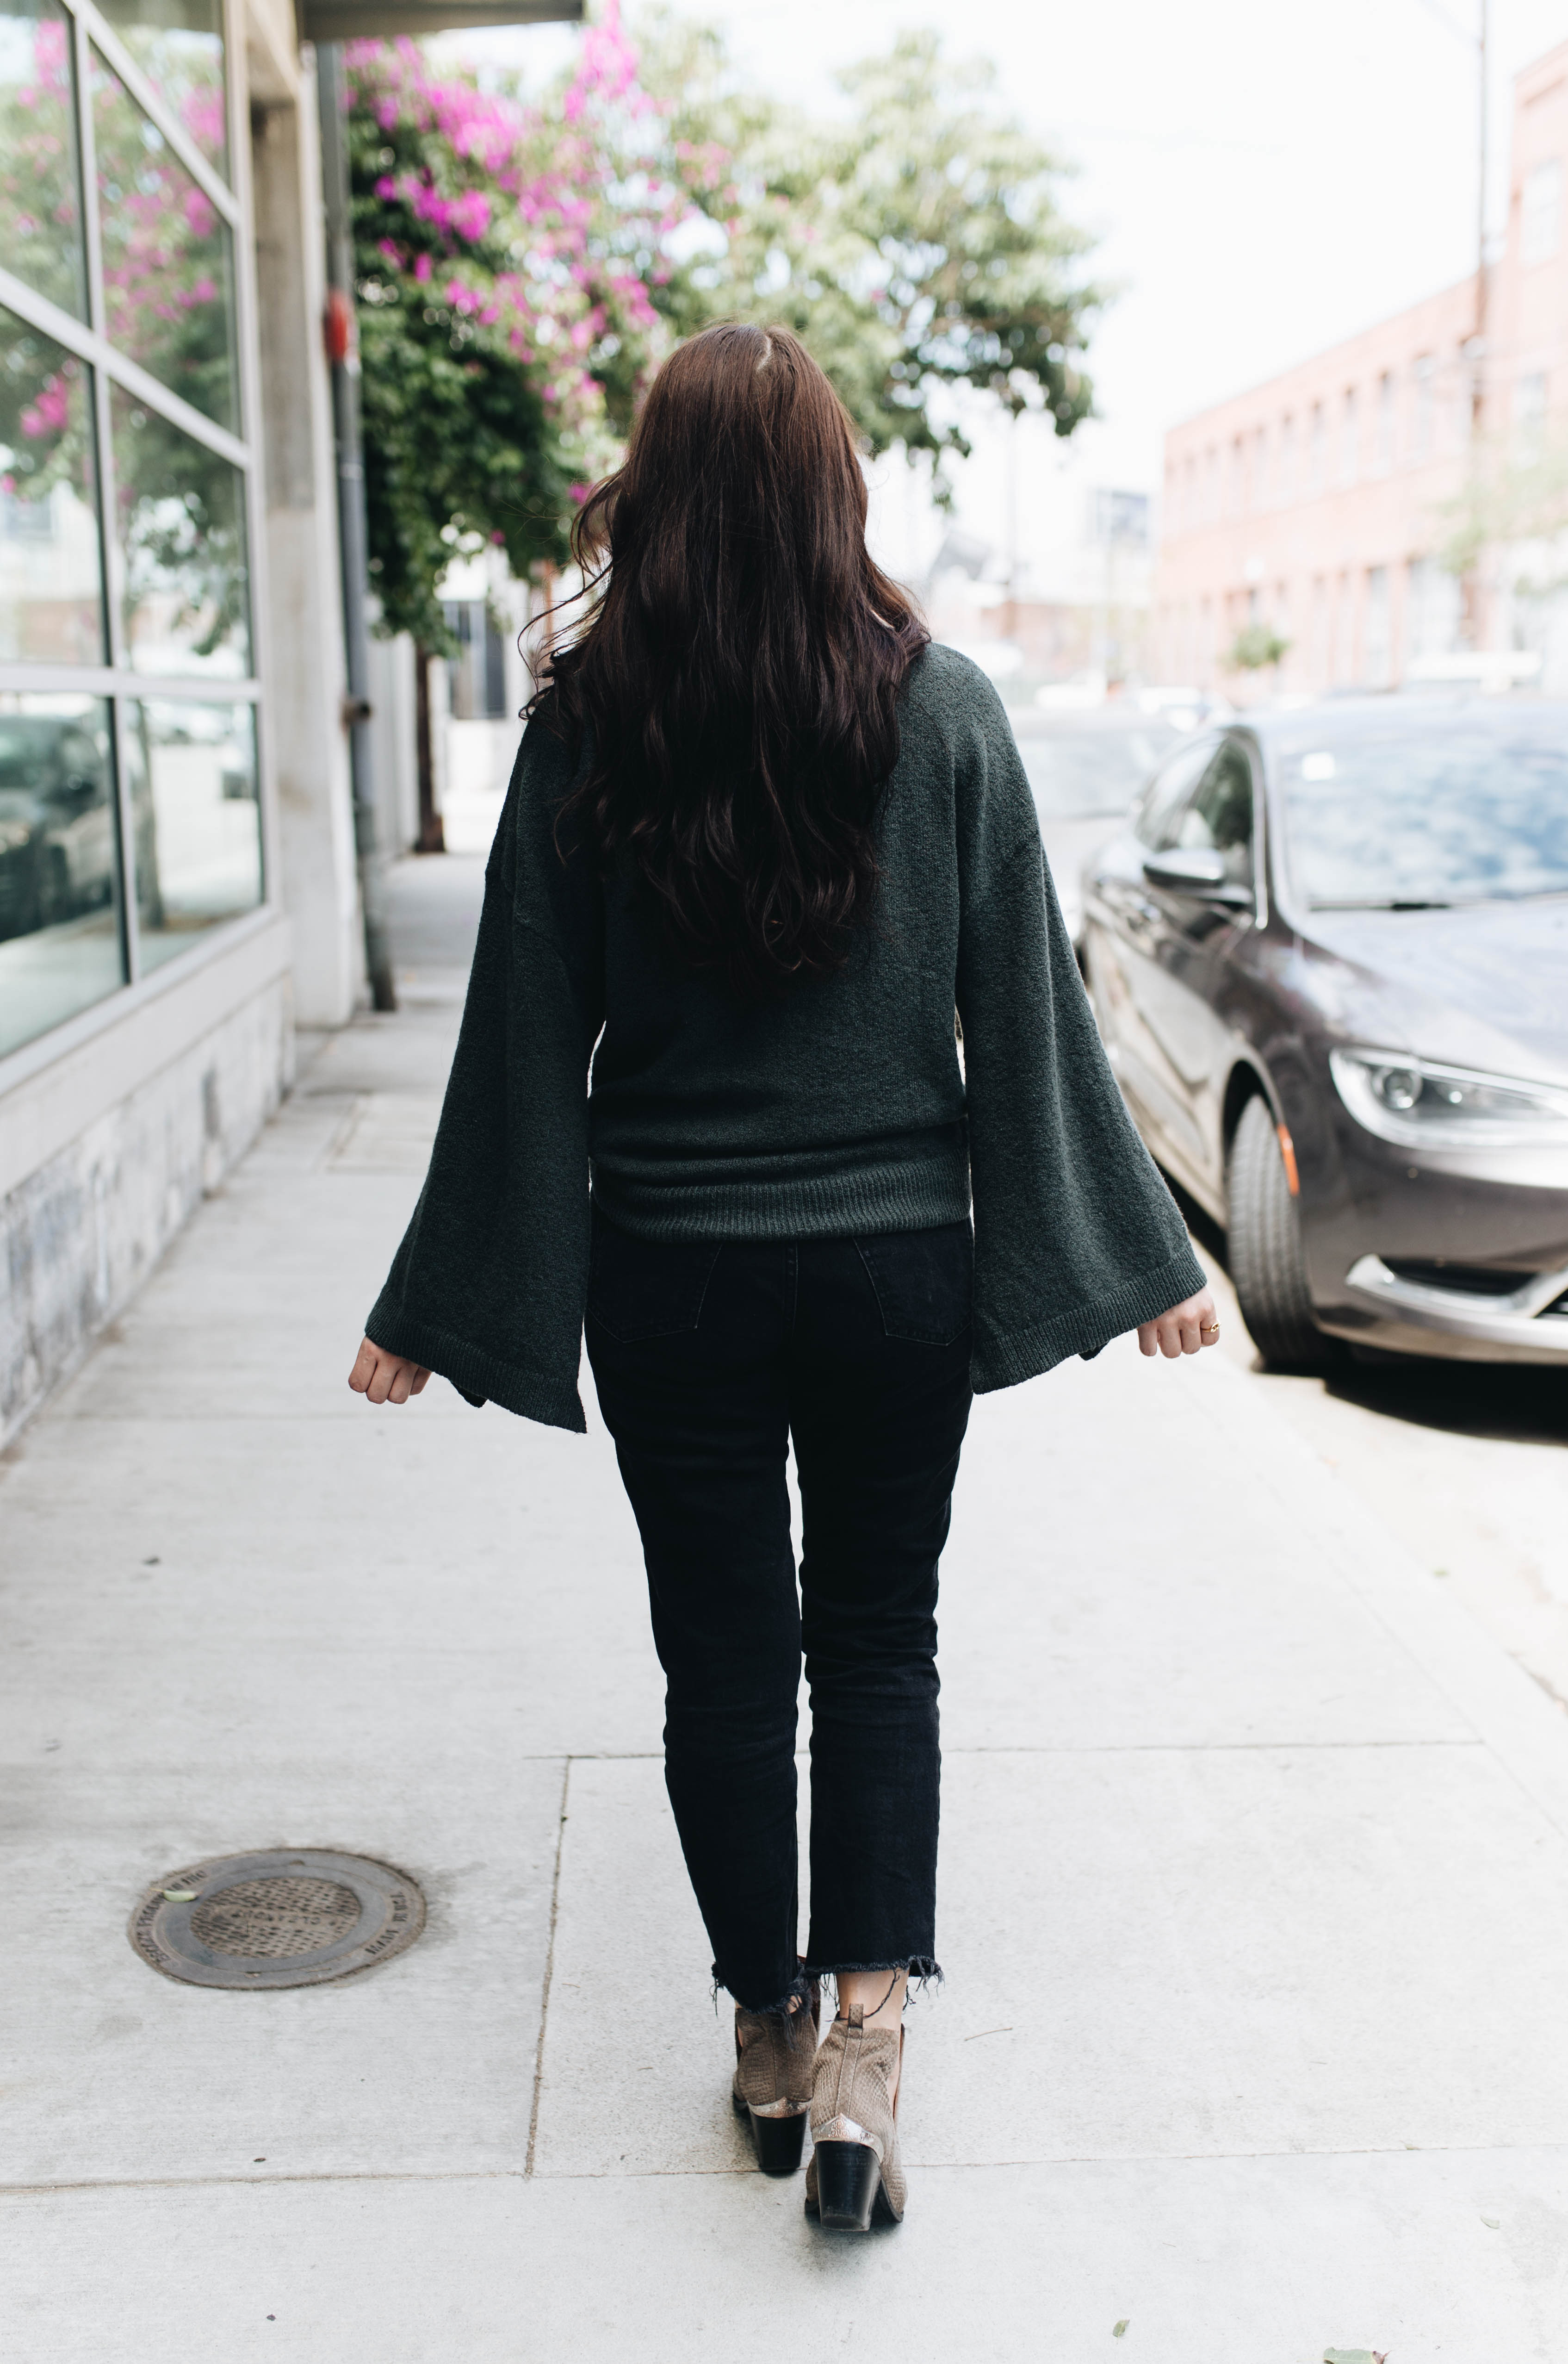 Bell Sleeves & Boots | Twinspiration 